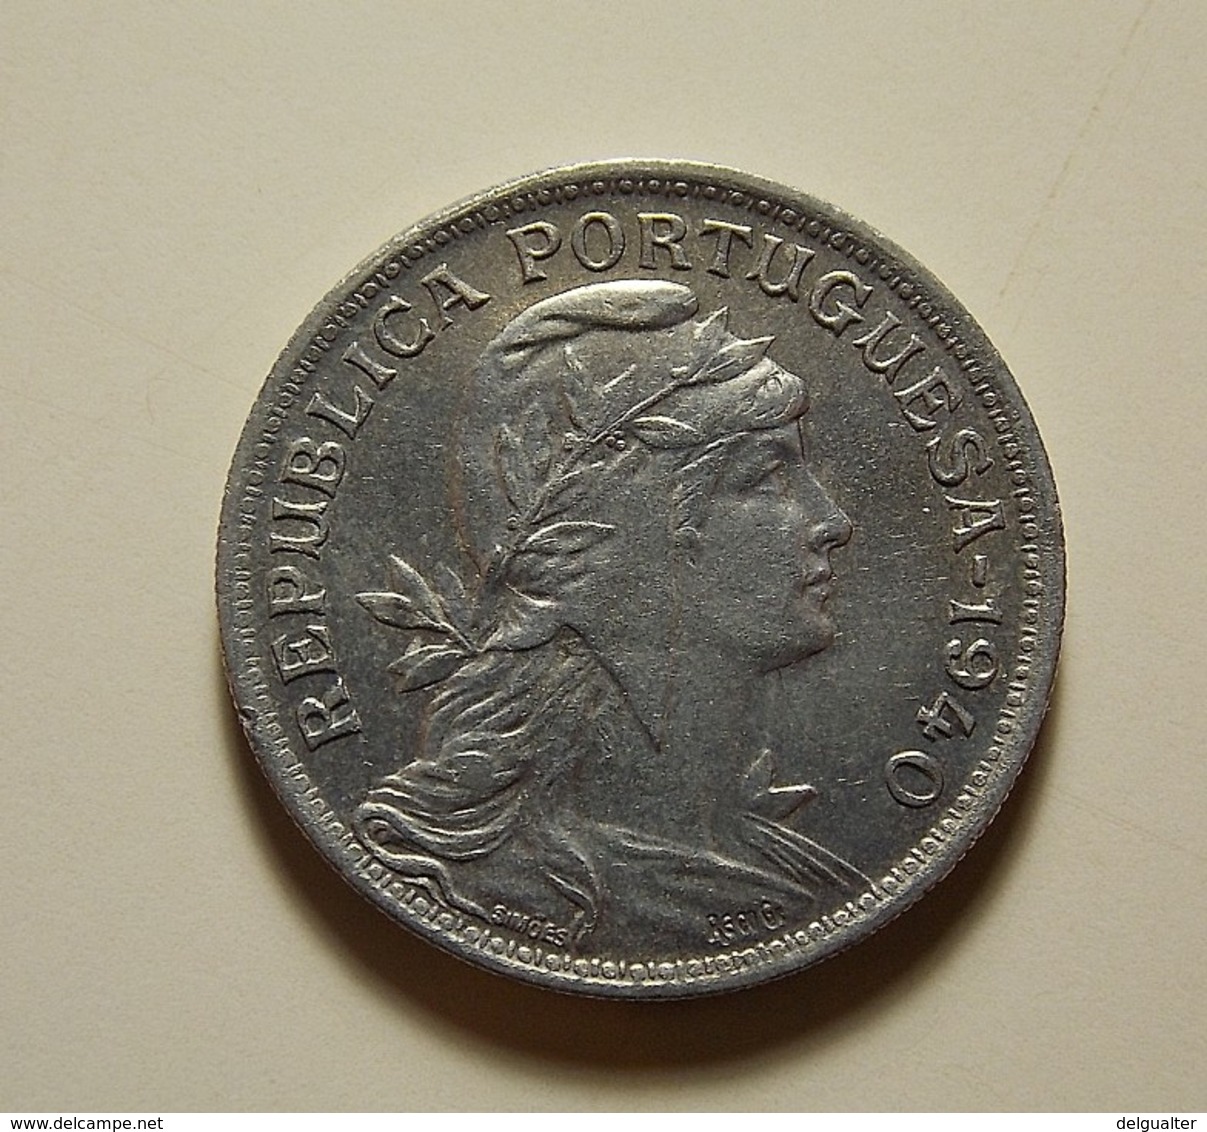 Portugal 50 Centavos 1940 Has A Scratch On The Reverse Of The Coin - Portugal